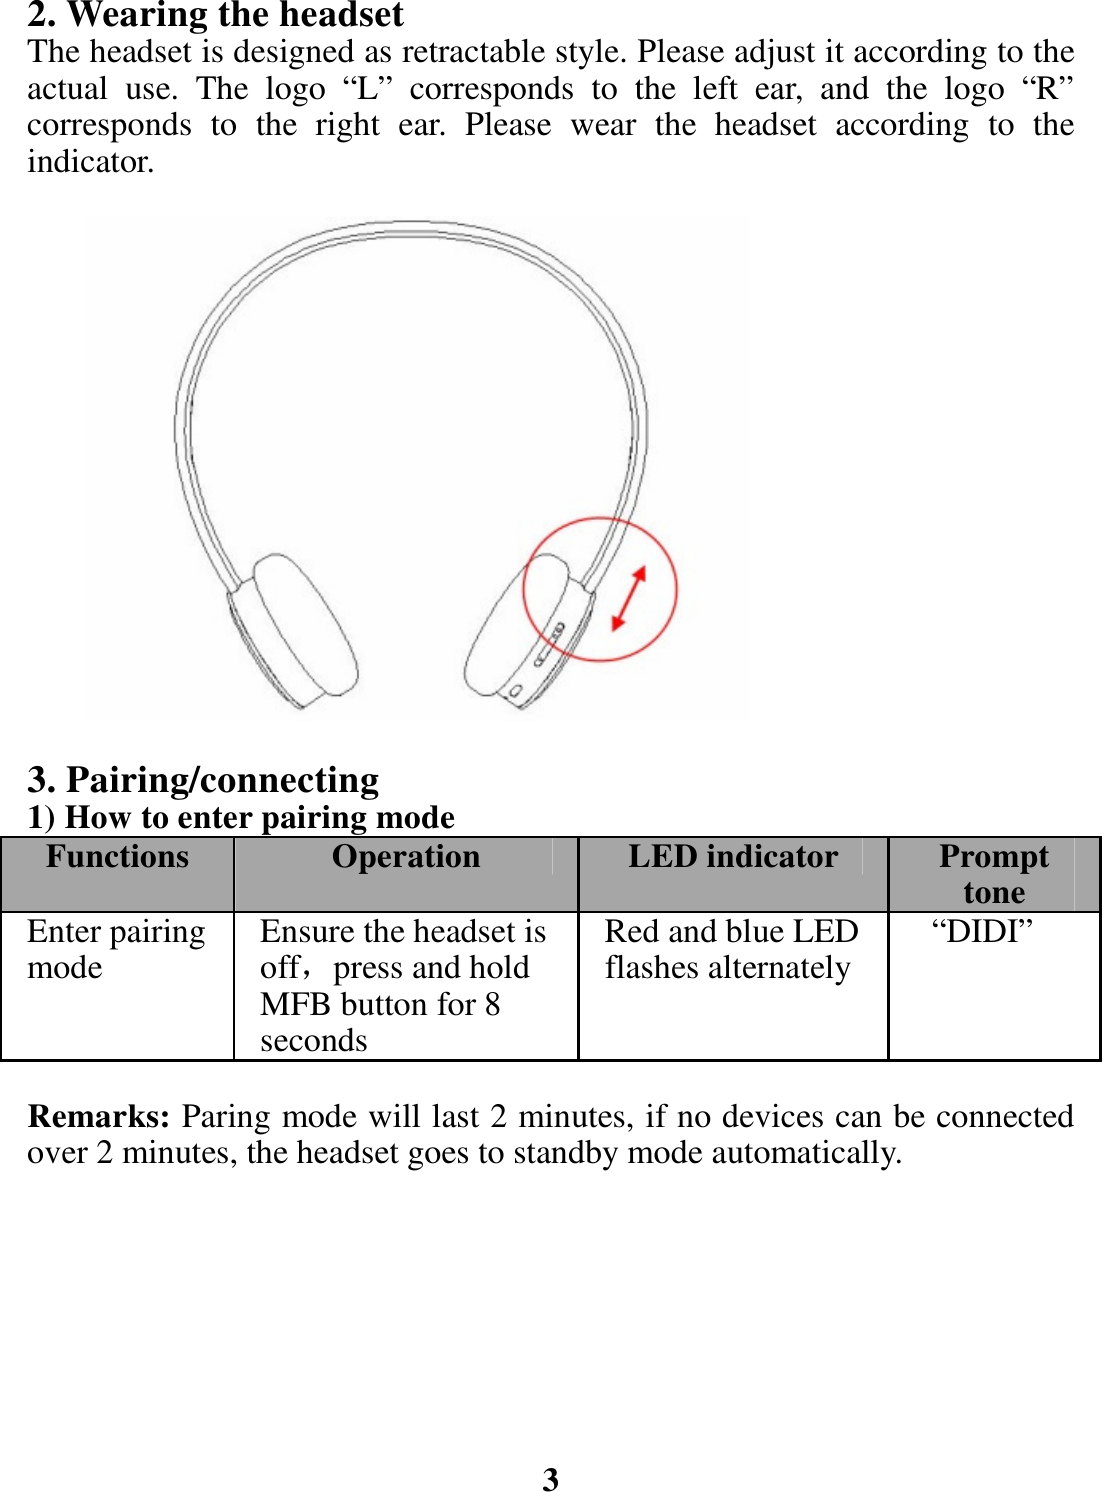 2. Wearing the headset The headset is designed as retractable style. Please adjust it according to the actual use. The logo “L” corresponds to the left ear, and the logo “R” corresponds to the right ear. Please wear the headset according to the indicator.                 3. Pairing/connecting 1) How to enter pairing mode Functions  Operation LED indicator  Prompt toneEnter pairing mode   Ensure the headset is off，press and hold MFB button for 8 seconds Red and blue LED flashes alternately  “DIDI” Remarks: Paring mode will last 2 minutes, if no devices can be connected over 2 minutes, the headset goes to standby mode automatically.         3 